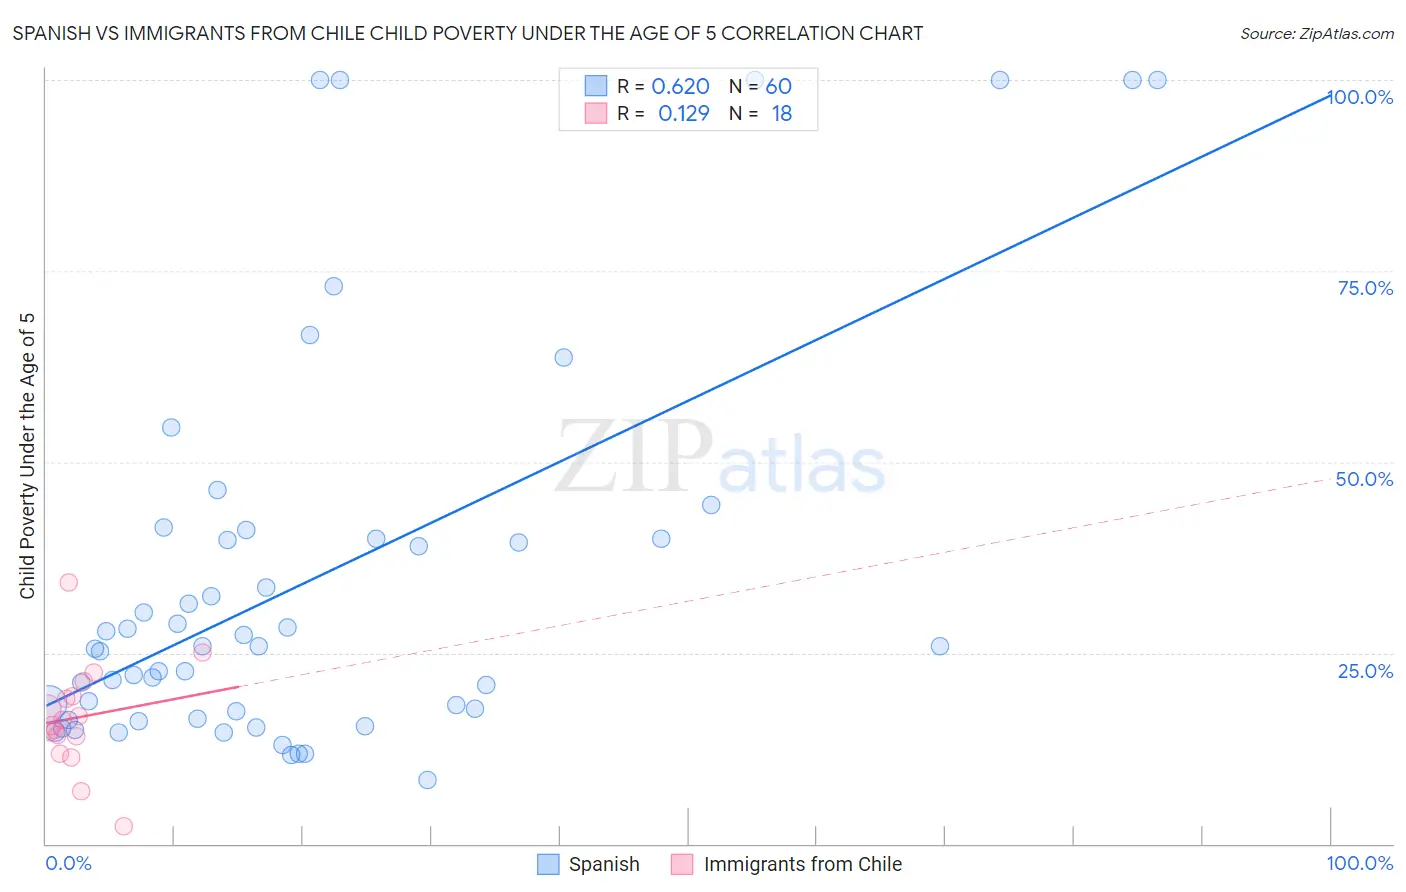 Spanish vs Immigrants from Chile Child Poverty Under the Age of 5